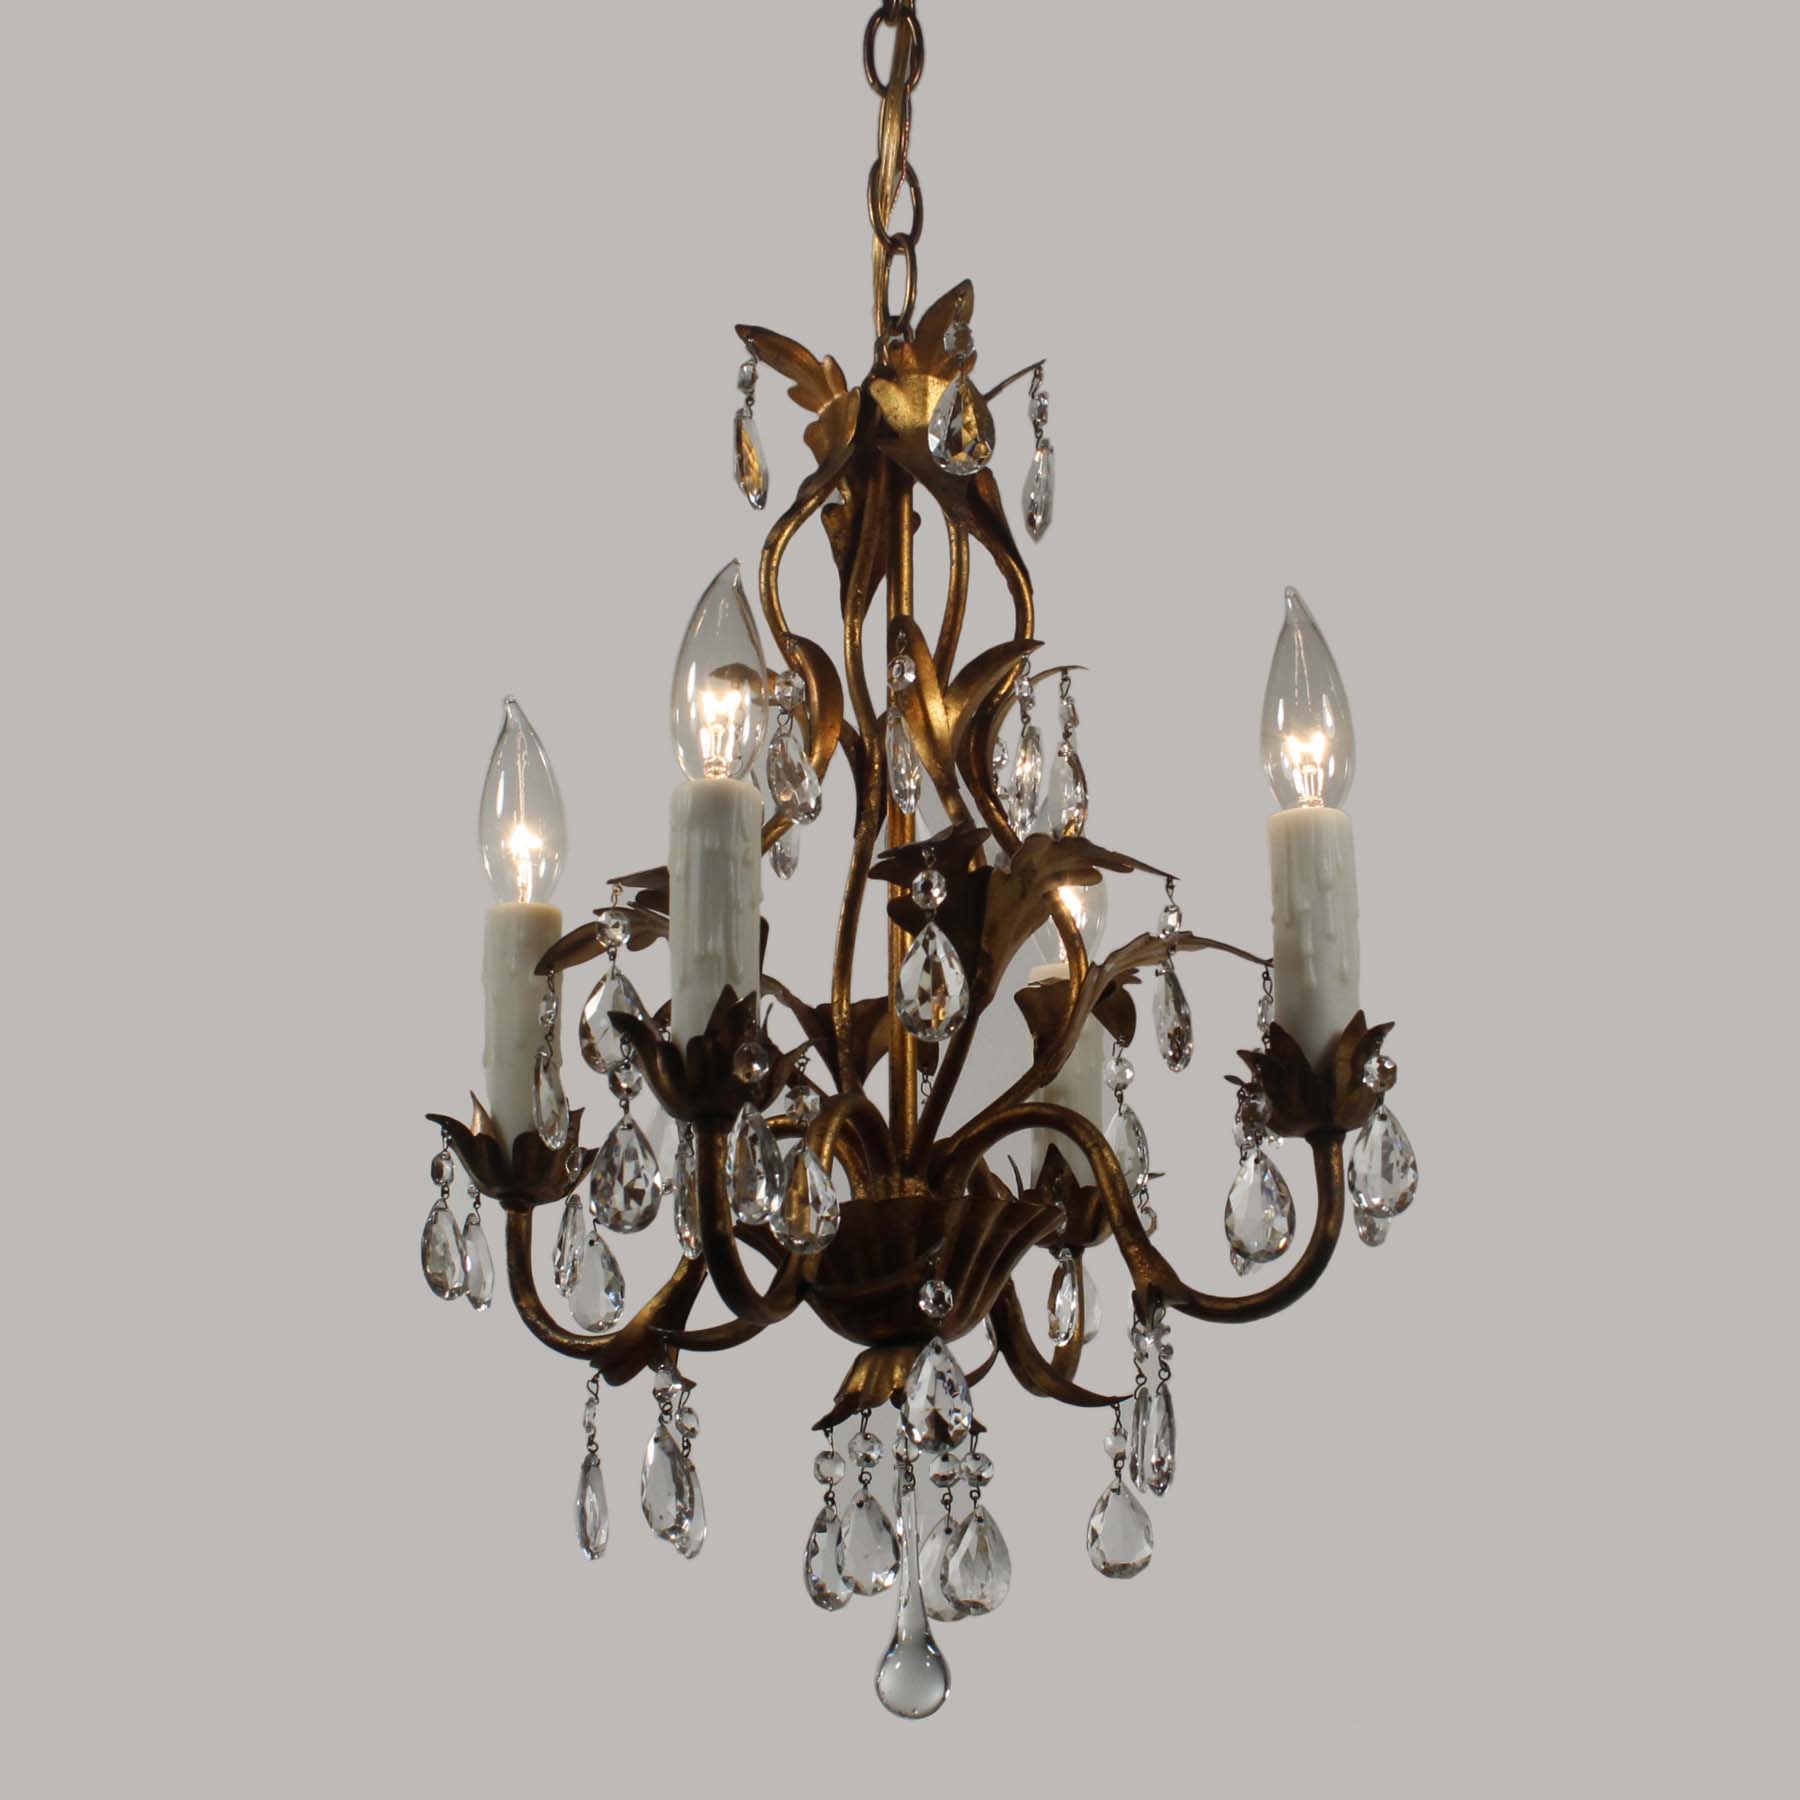 SOLD Vintage Neoclassical Brass Chandelier with Prisms-67526